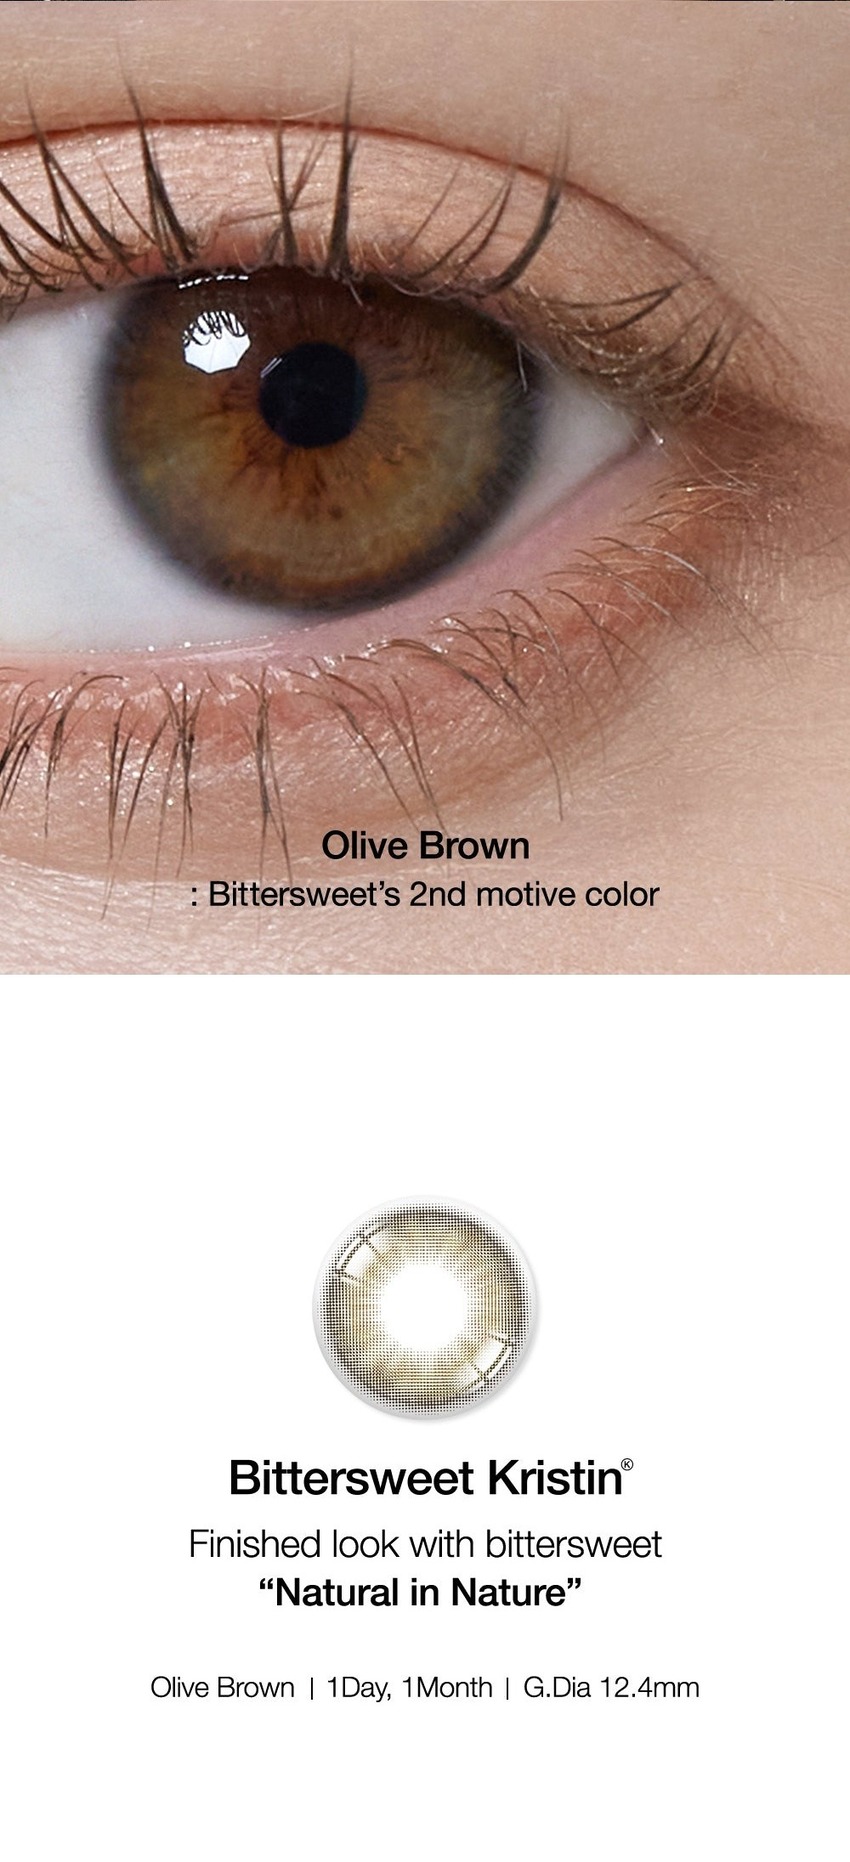 Embrace the daily elegance with Bittersweet Olive Brown colored contacts.